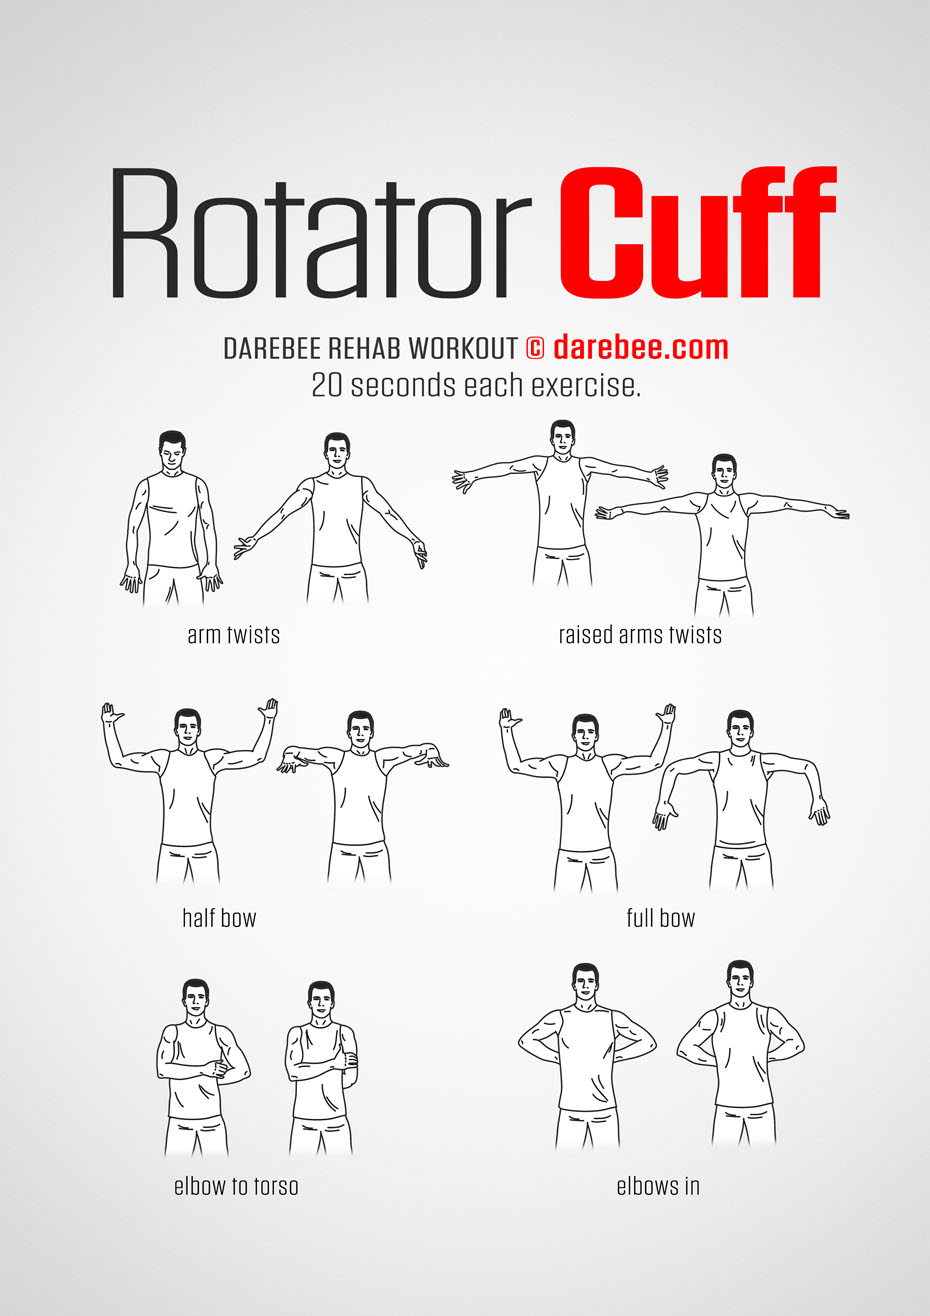 how-to-do-rotator-cuff-exercises-online-degrees